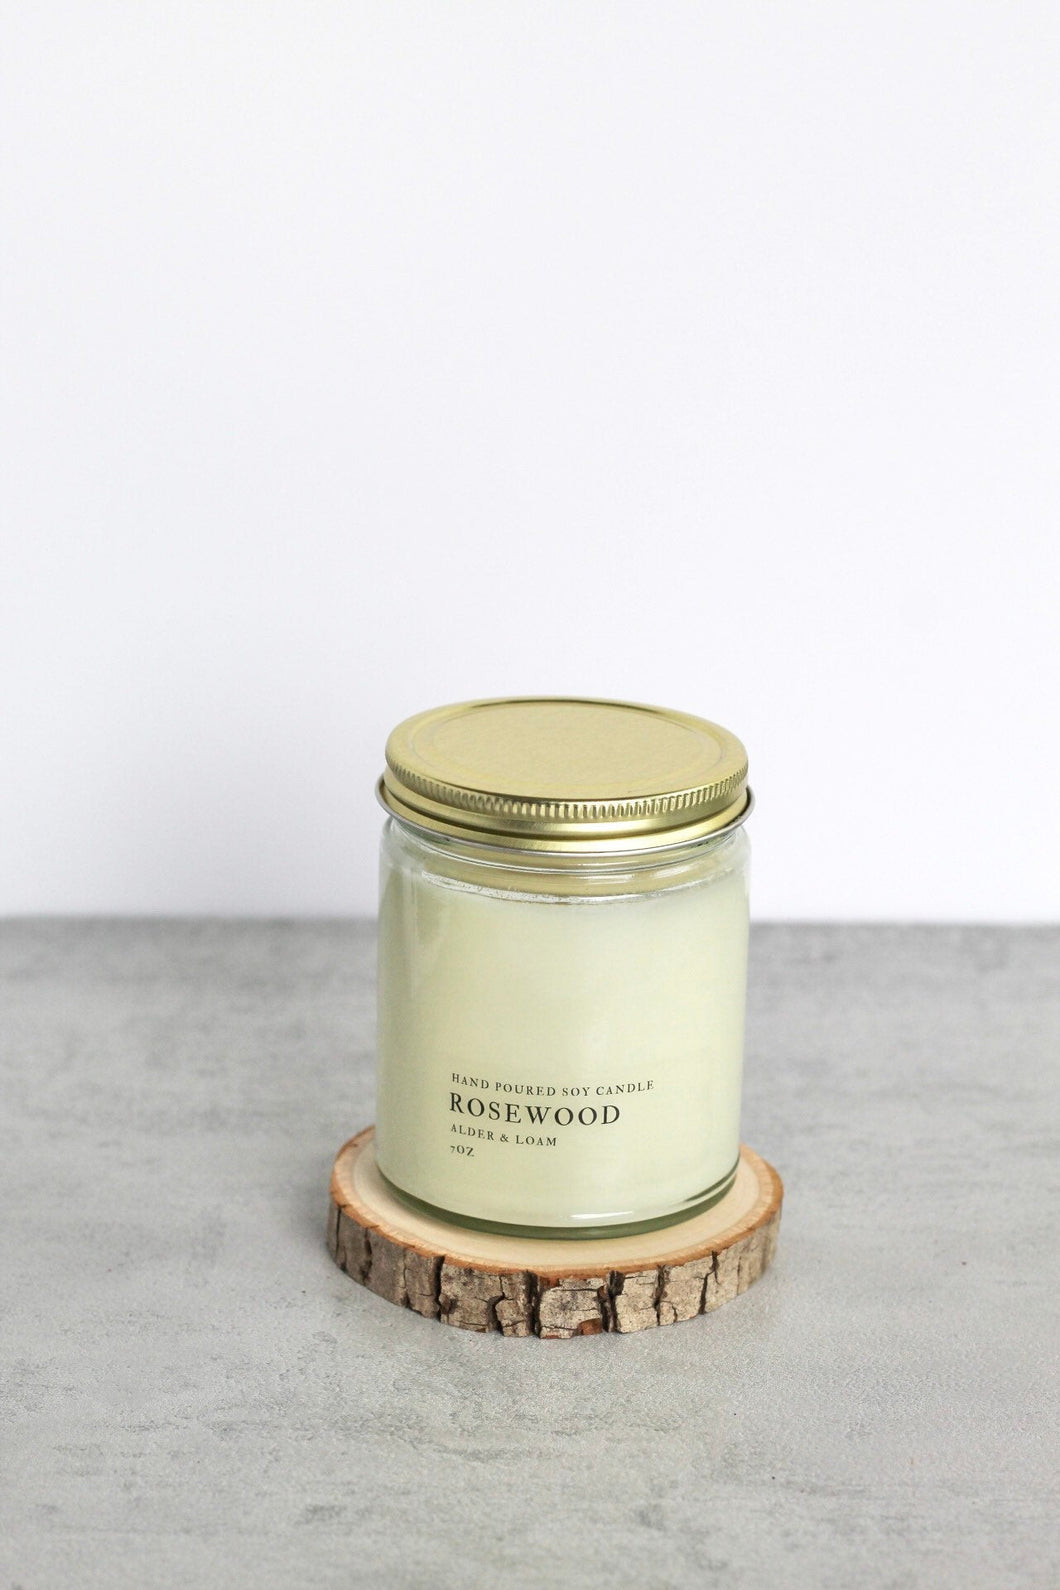 Rosewood Soy Candle, Hand Poured, Natural, Eco Friendly, Earthy Scent, 7 oz Jar